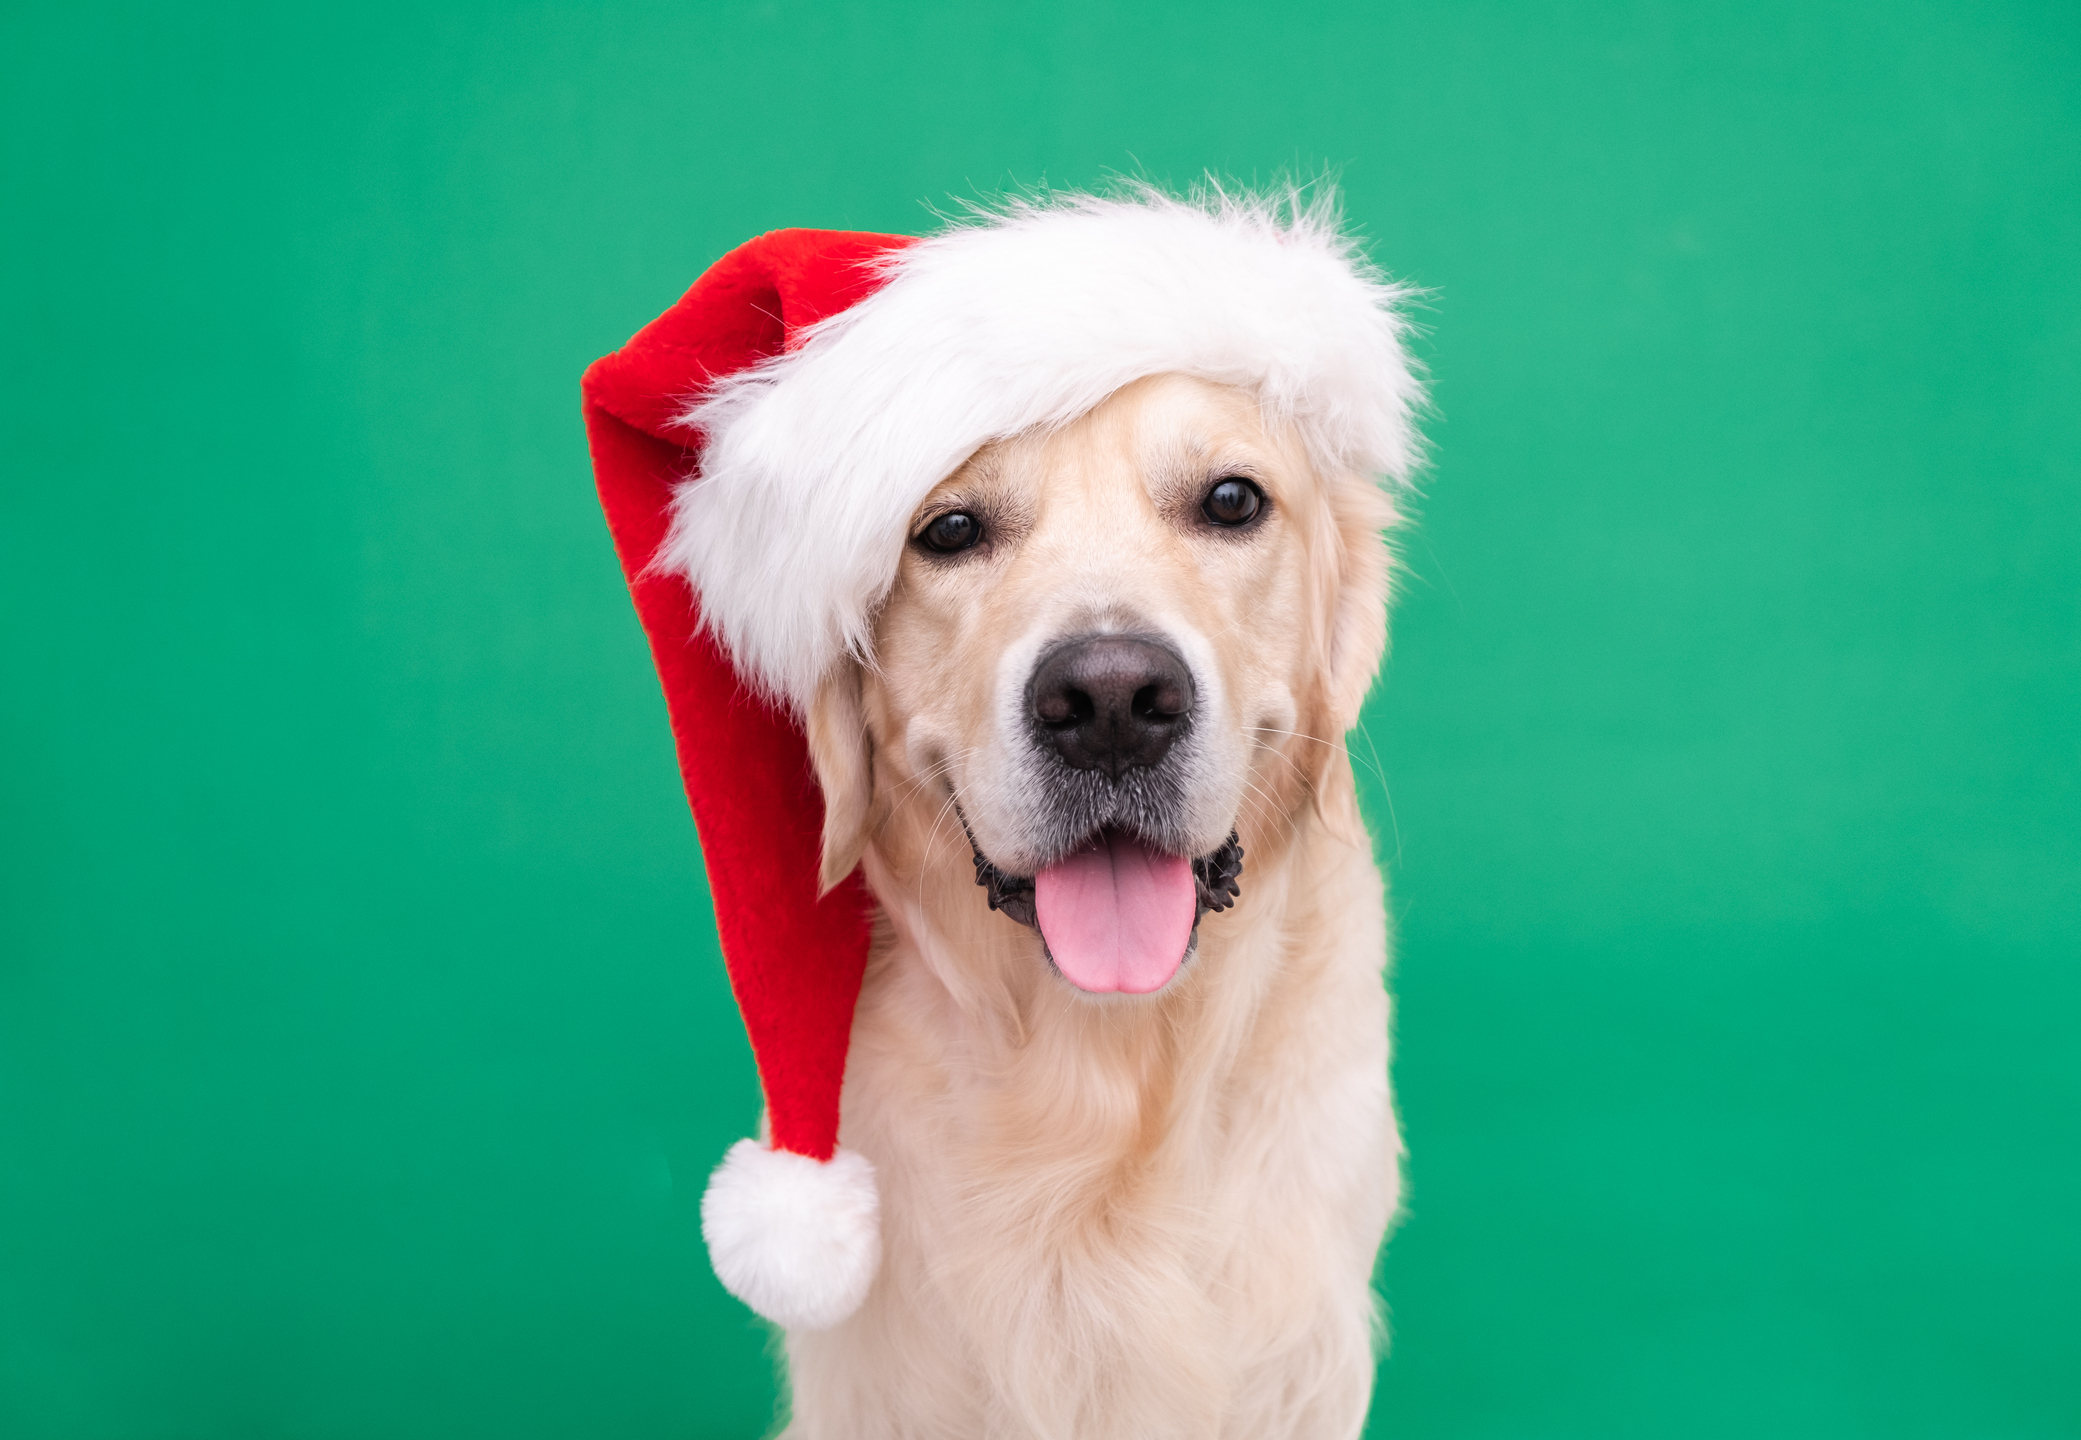 Owners prioritise dogs ahead of humans for Christmas gifts this year